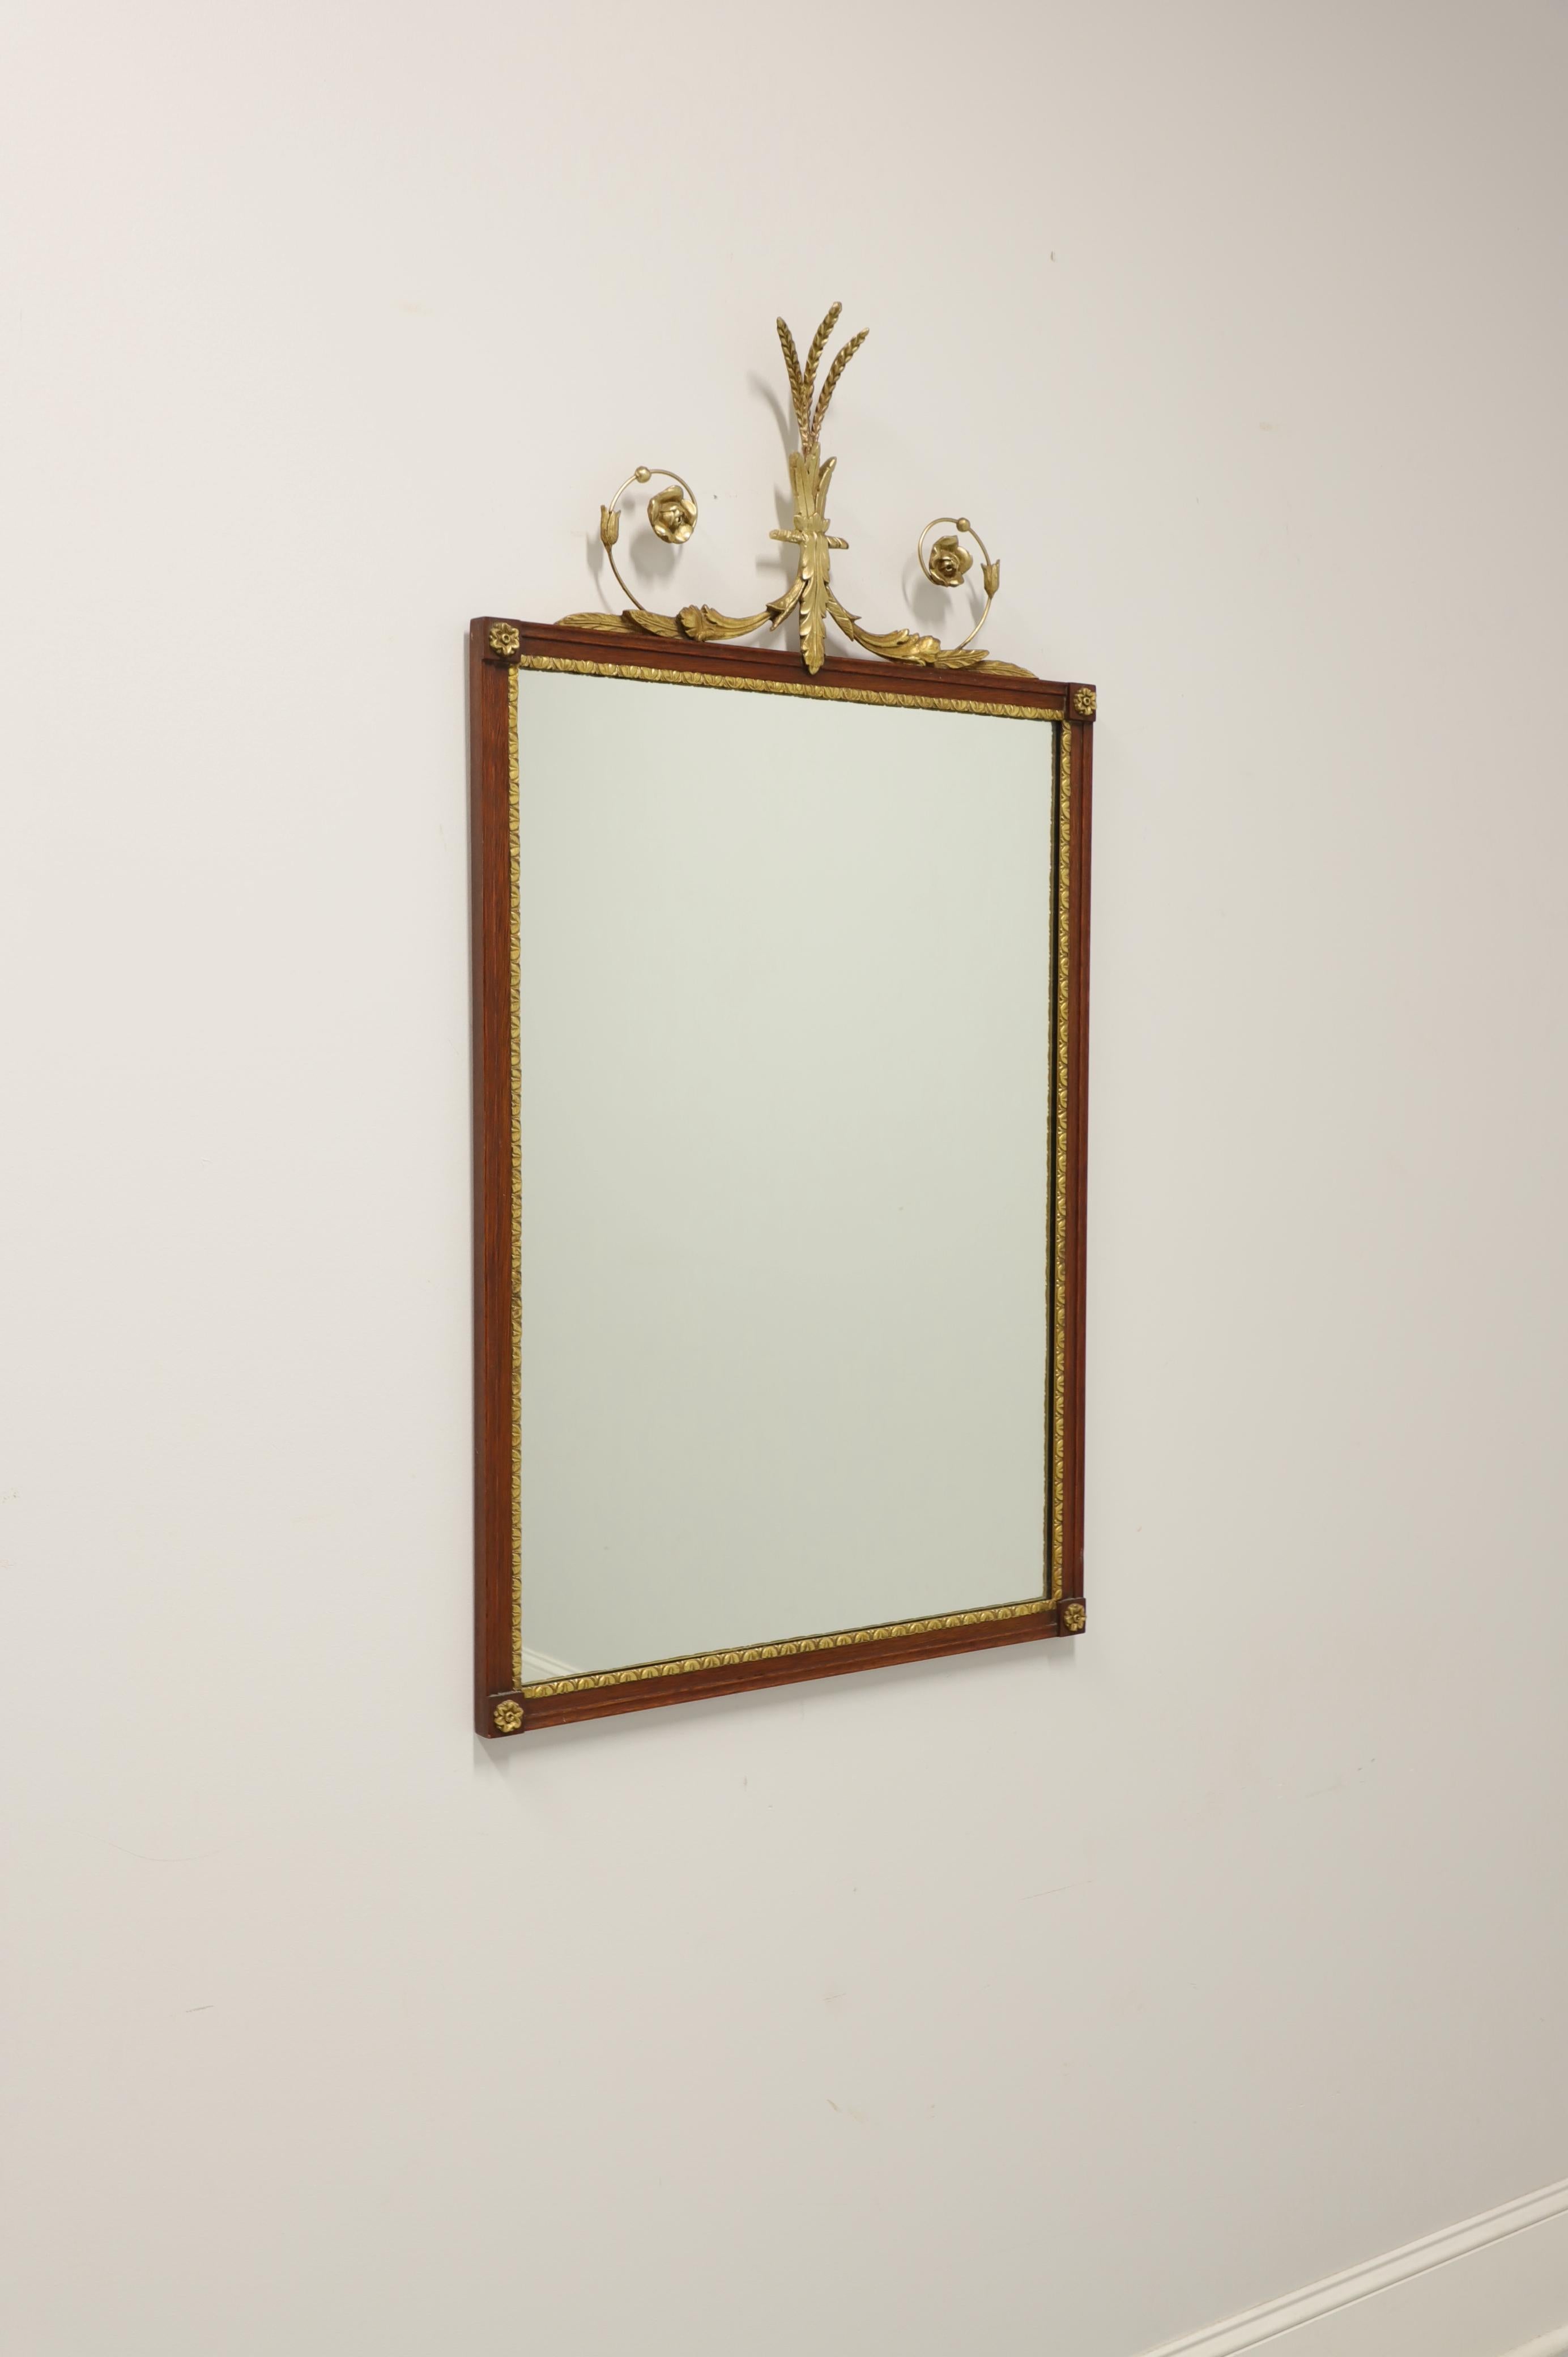 A Neoclassical style wall mirror, unbranded. Mirrored glass in a mahogany frame with gold painted ornamentation. Features an ornate garland with plume to top of frame, gold trim and gold medallions to four corners. Made in USA, in the late 20th